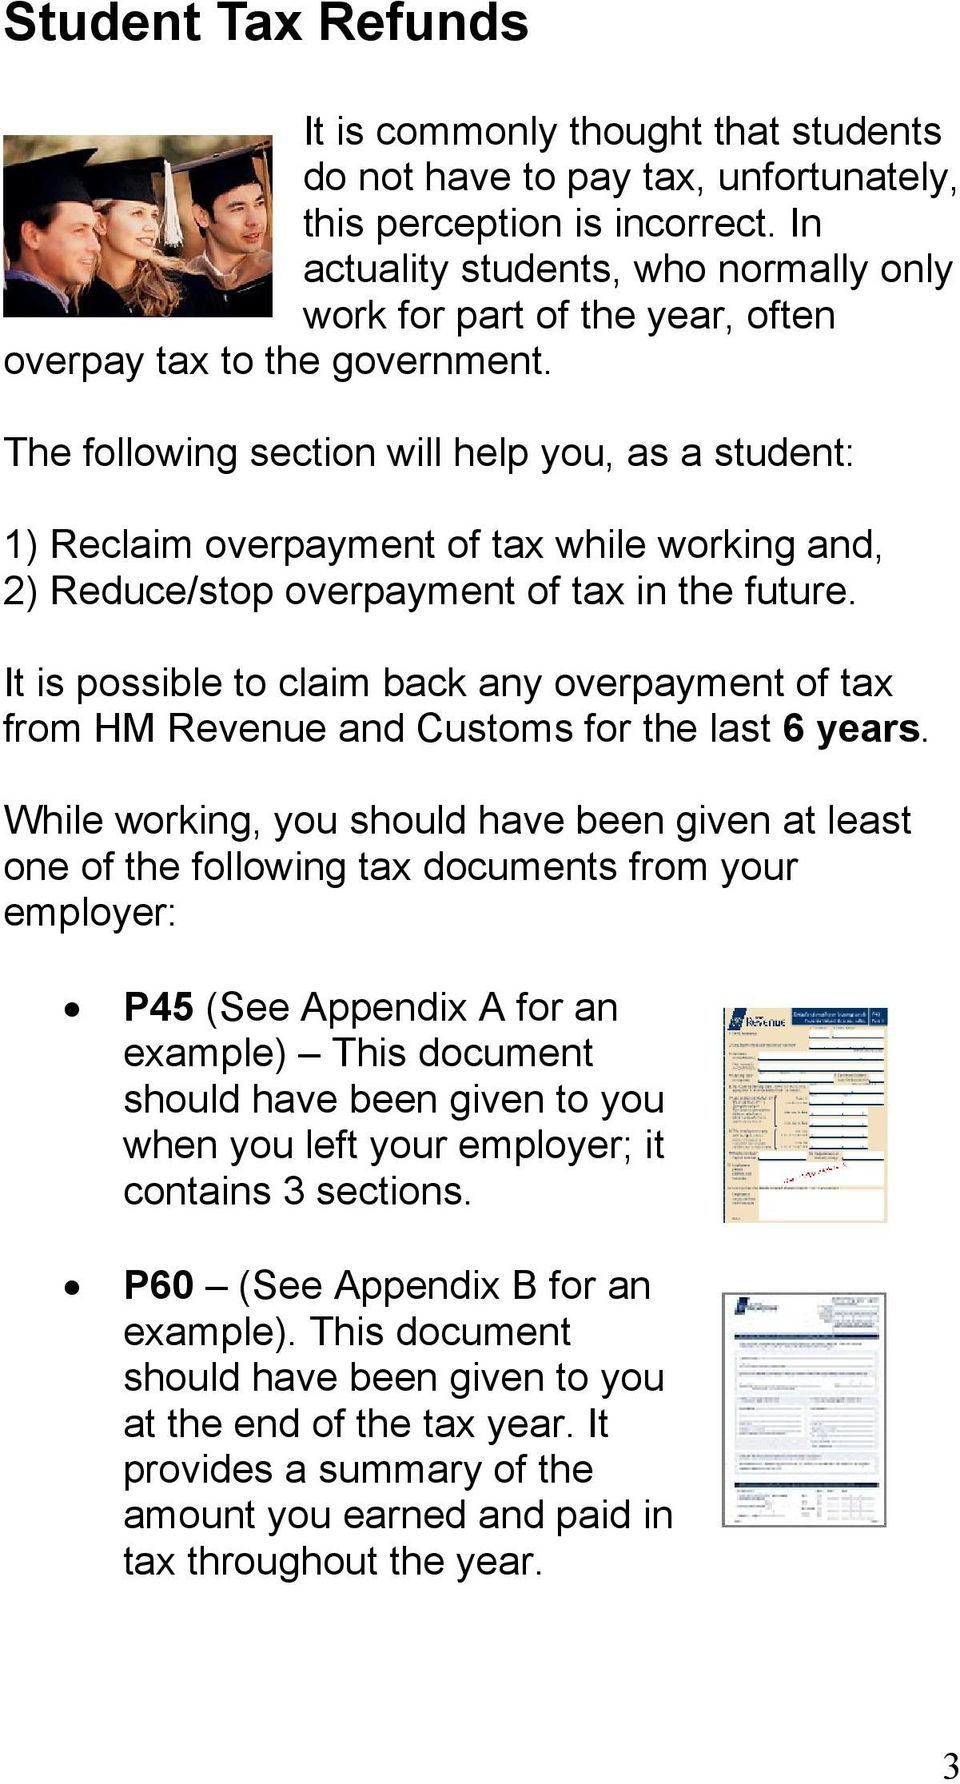 The following section will help you, as a student: 1) Reclaim overpayment of tax while working and, 2) Reduce/stop overpayment of tax in the future.